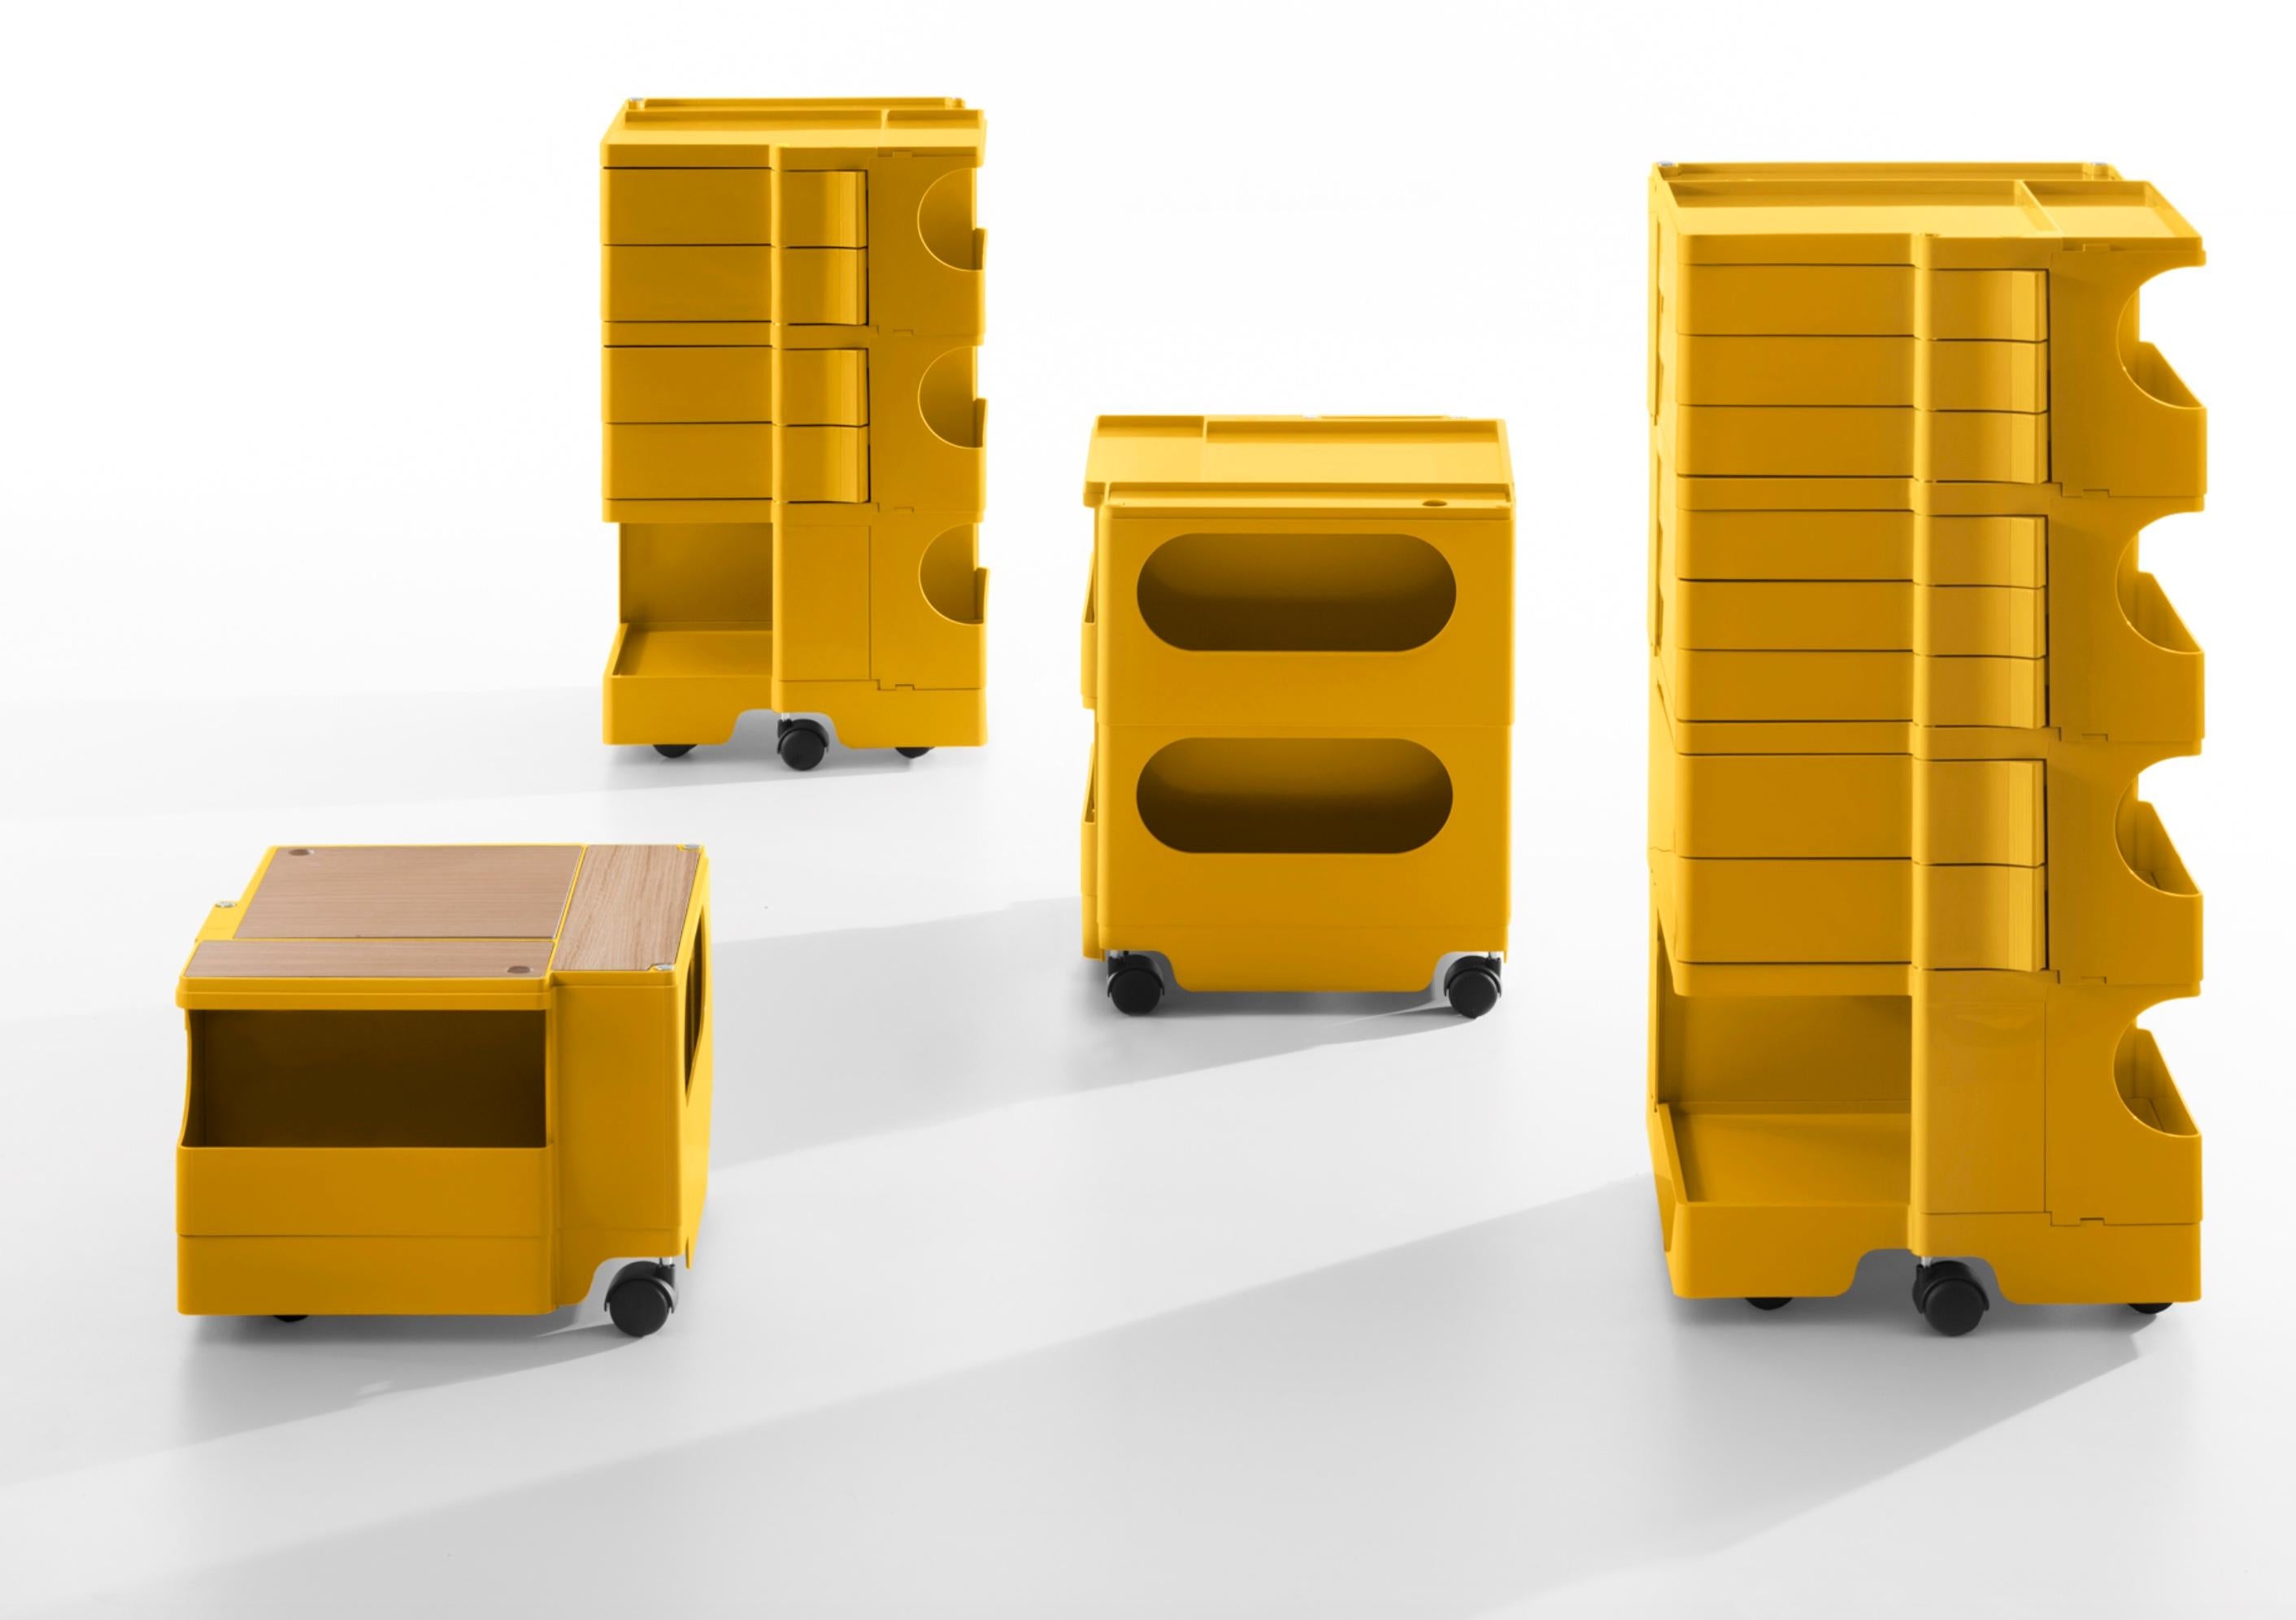 Joe Colombo 'Boby' Trolley for B-Line. Designed in 1970, current production. Part of the permanent collection of MoMA in New York and the “Triennale” in Milan, Smau Prize in 1971. 

Boby is much more than a simple container: it made design